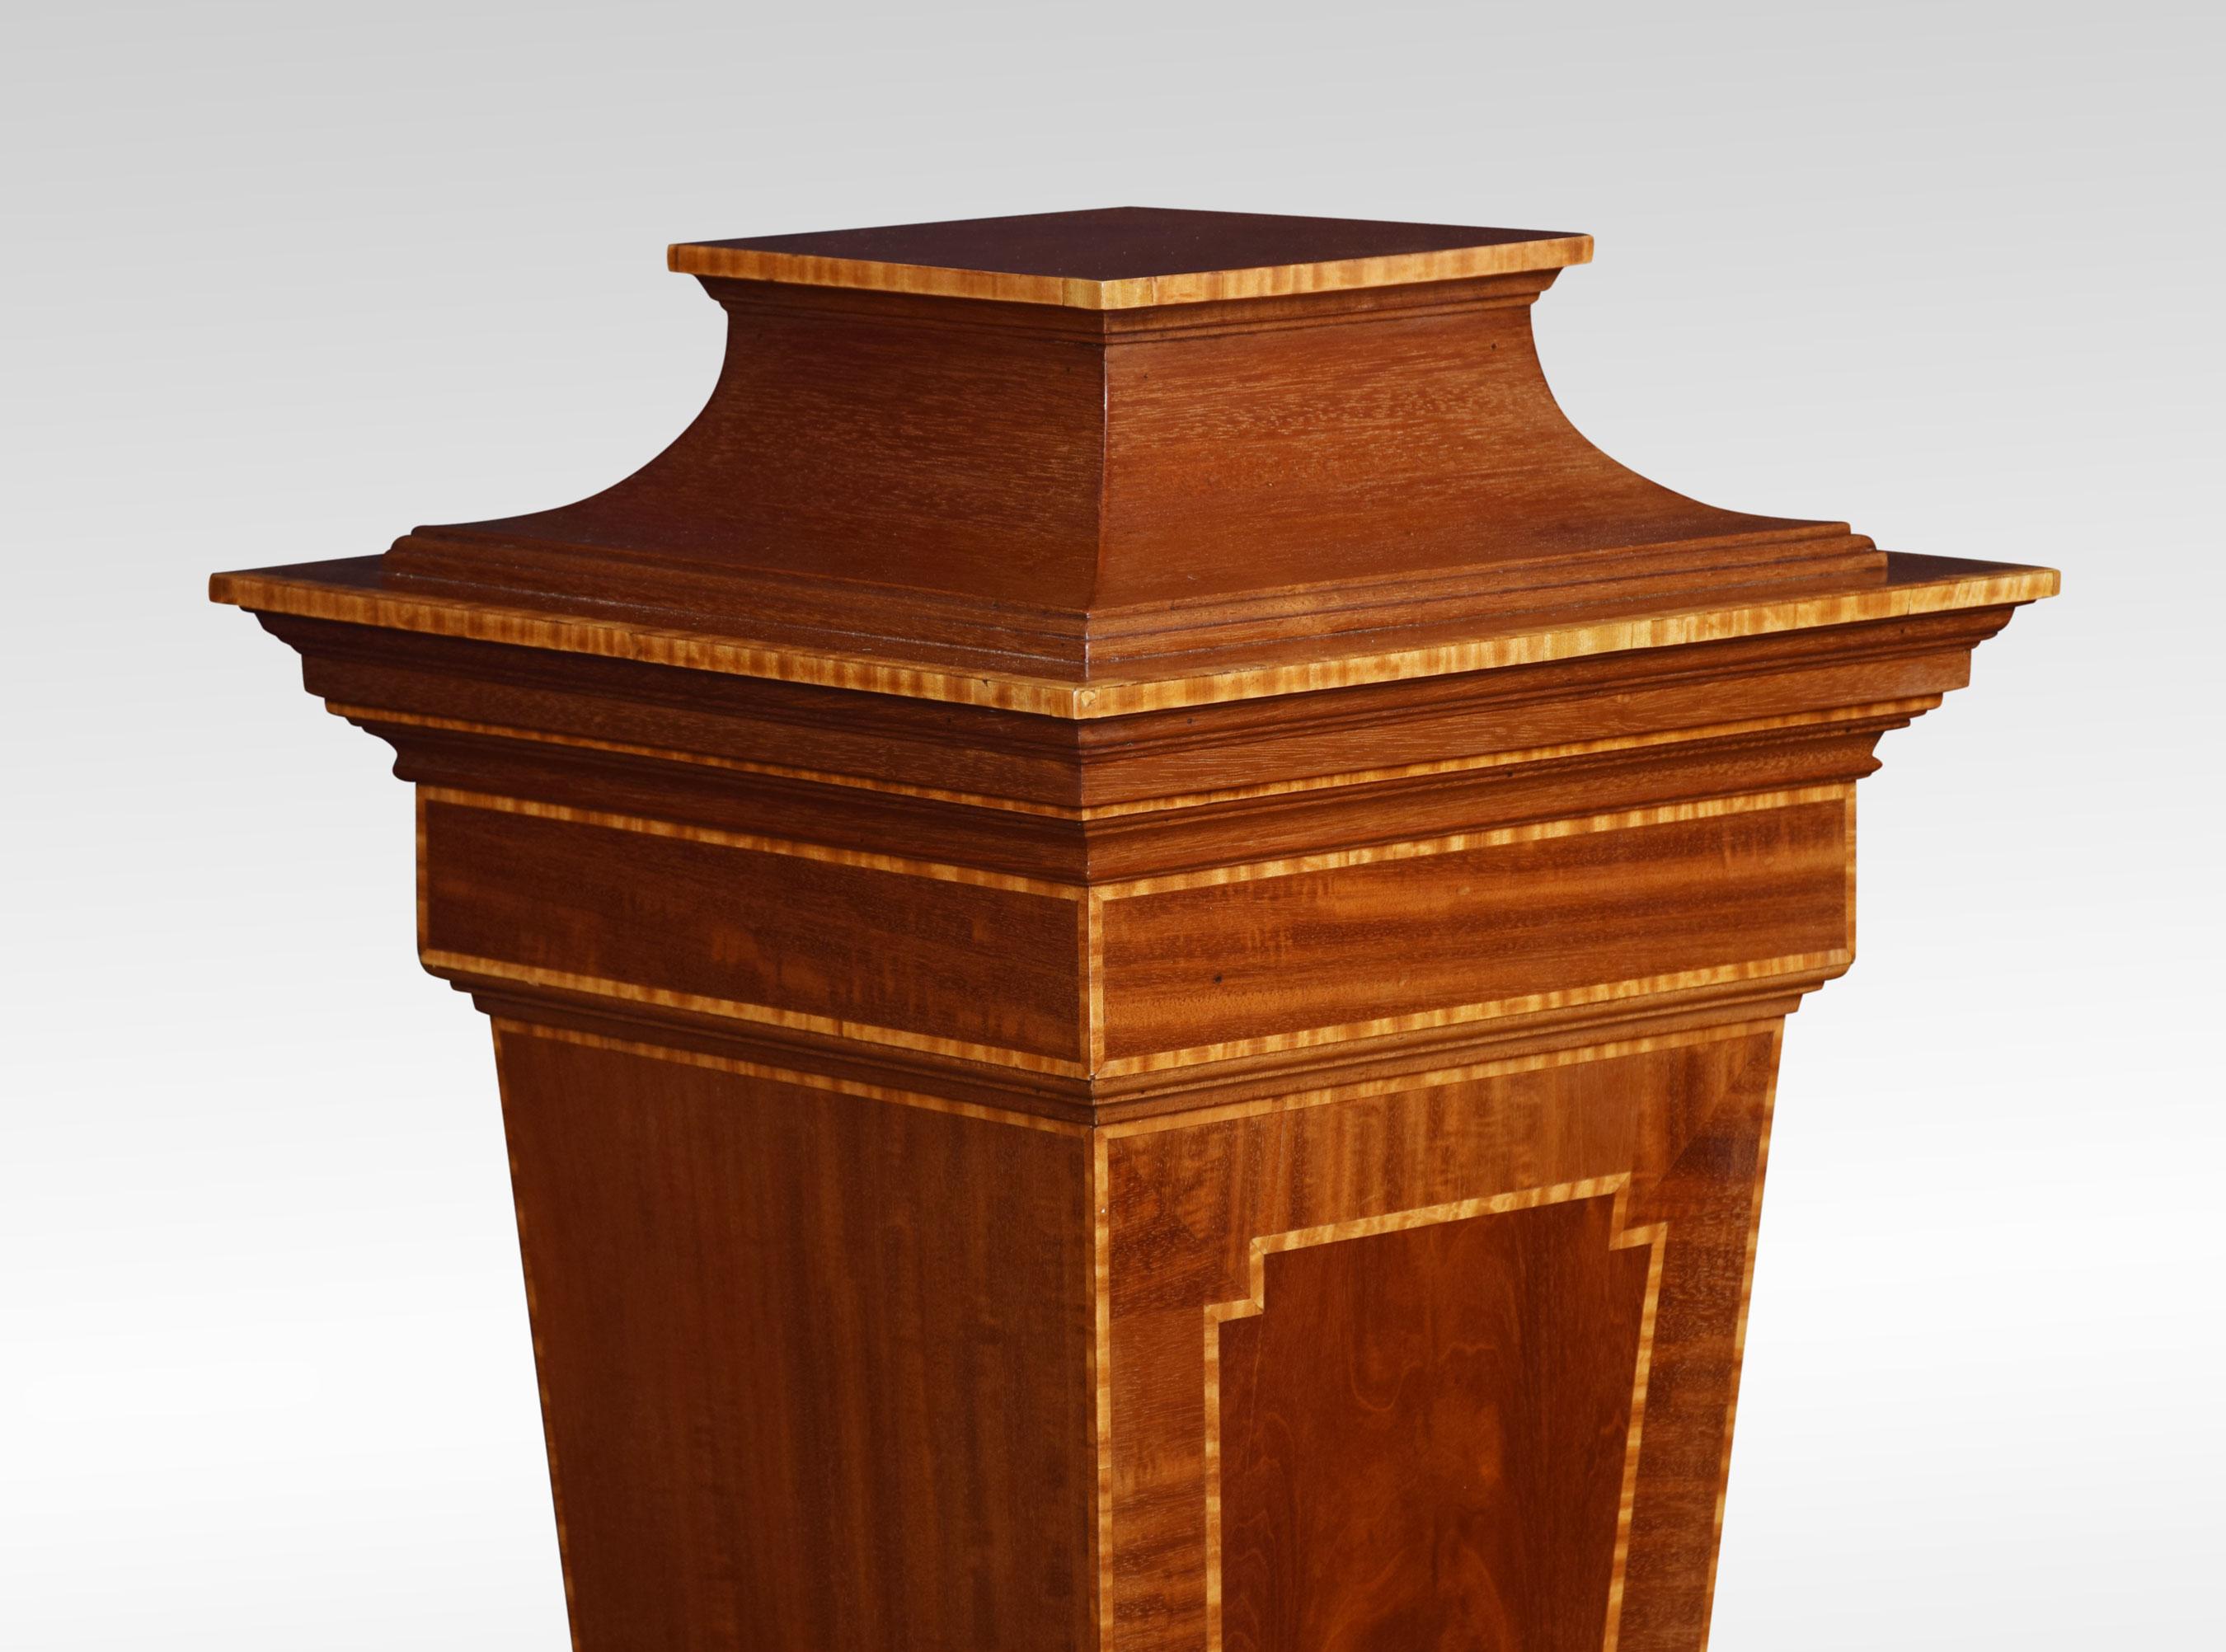 Mahogany pedestal torchiere stand, of tapering square form, with central flame mahogany panel surrounded in a crossbanded border. All raised up on stepped base.
Dimensions:
Height 41.5 inches
Width 14.5 inches
Depth 14.5 inches.